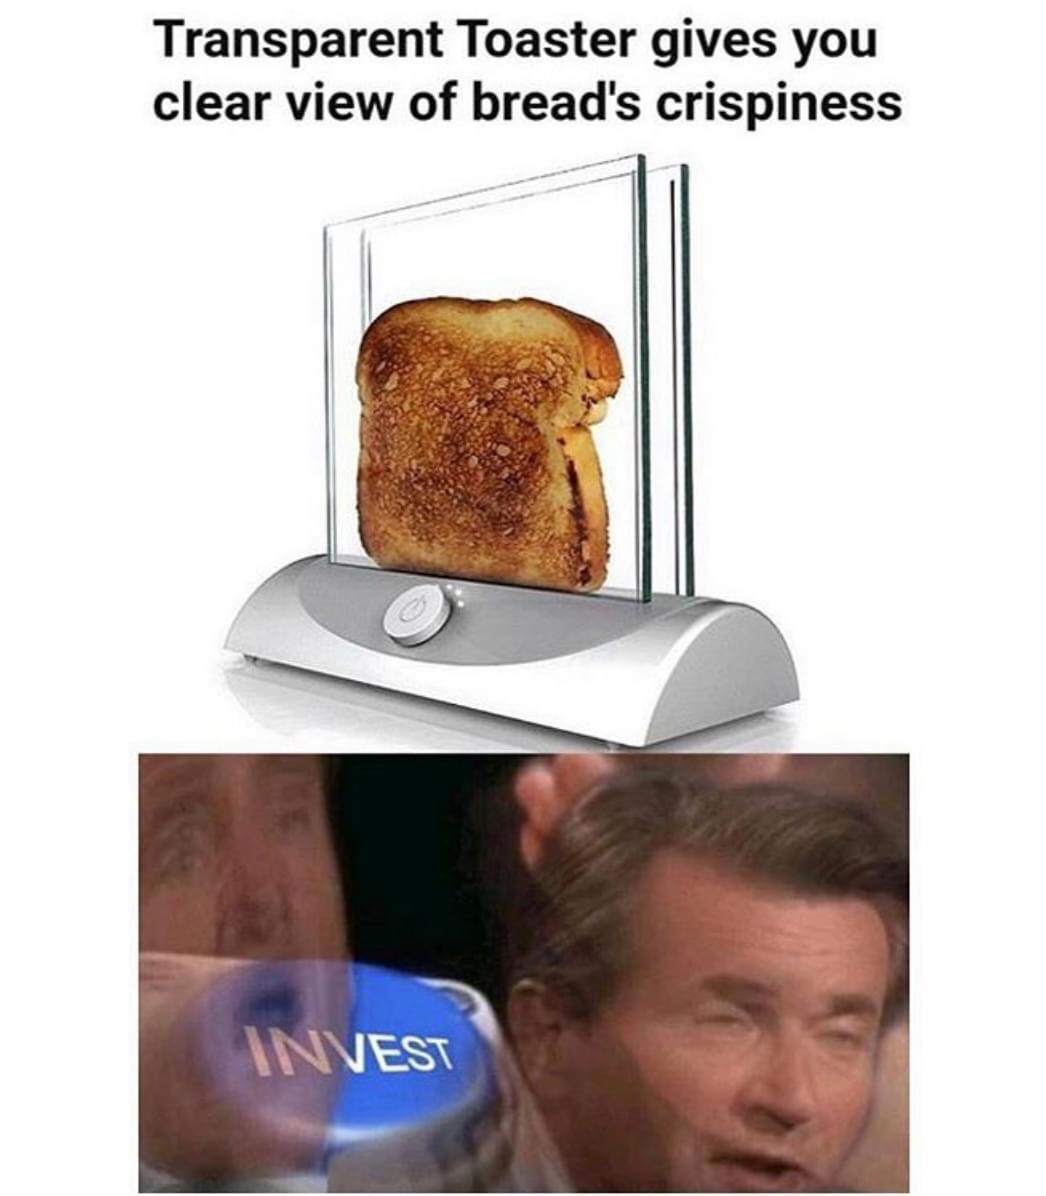 transparent toaster - Transparent Toaster gives you clear view of bread's crispiness Invest